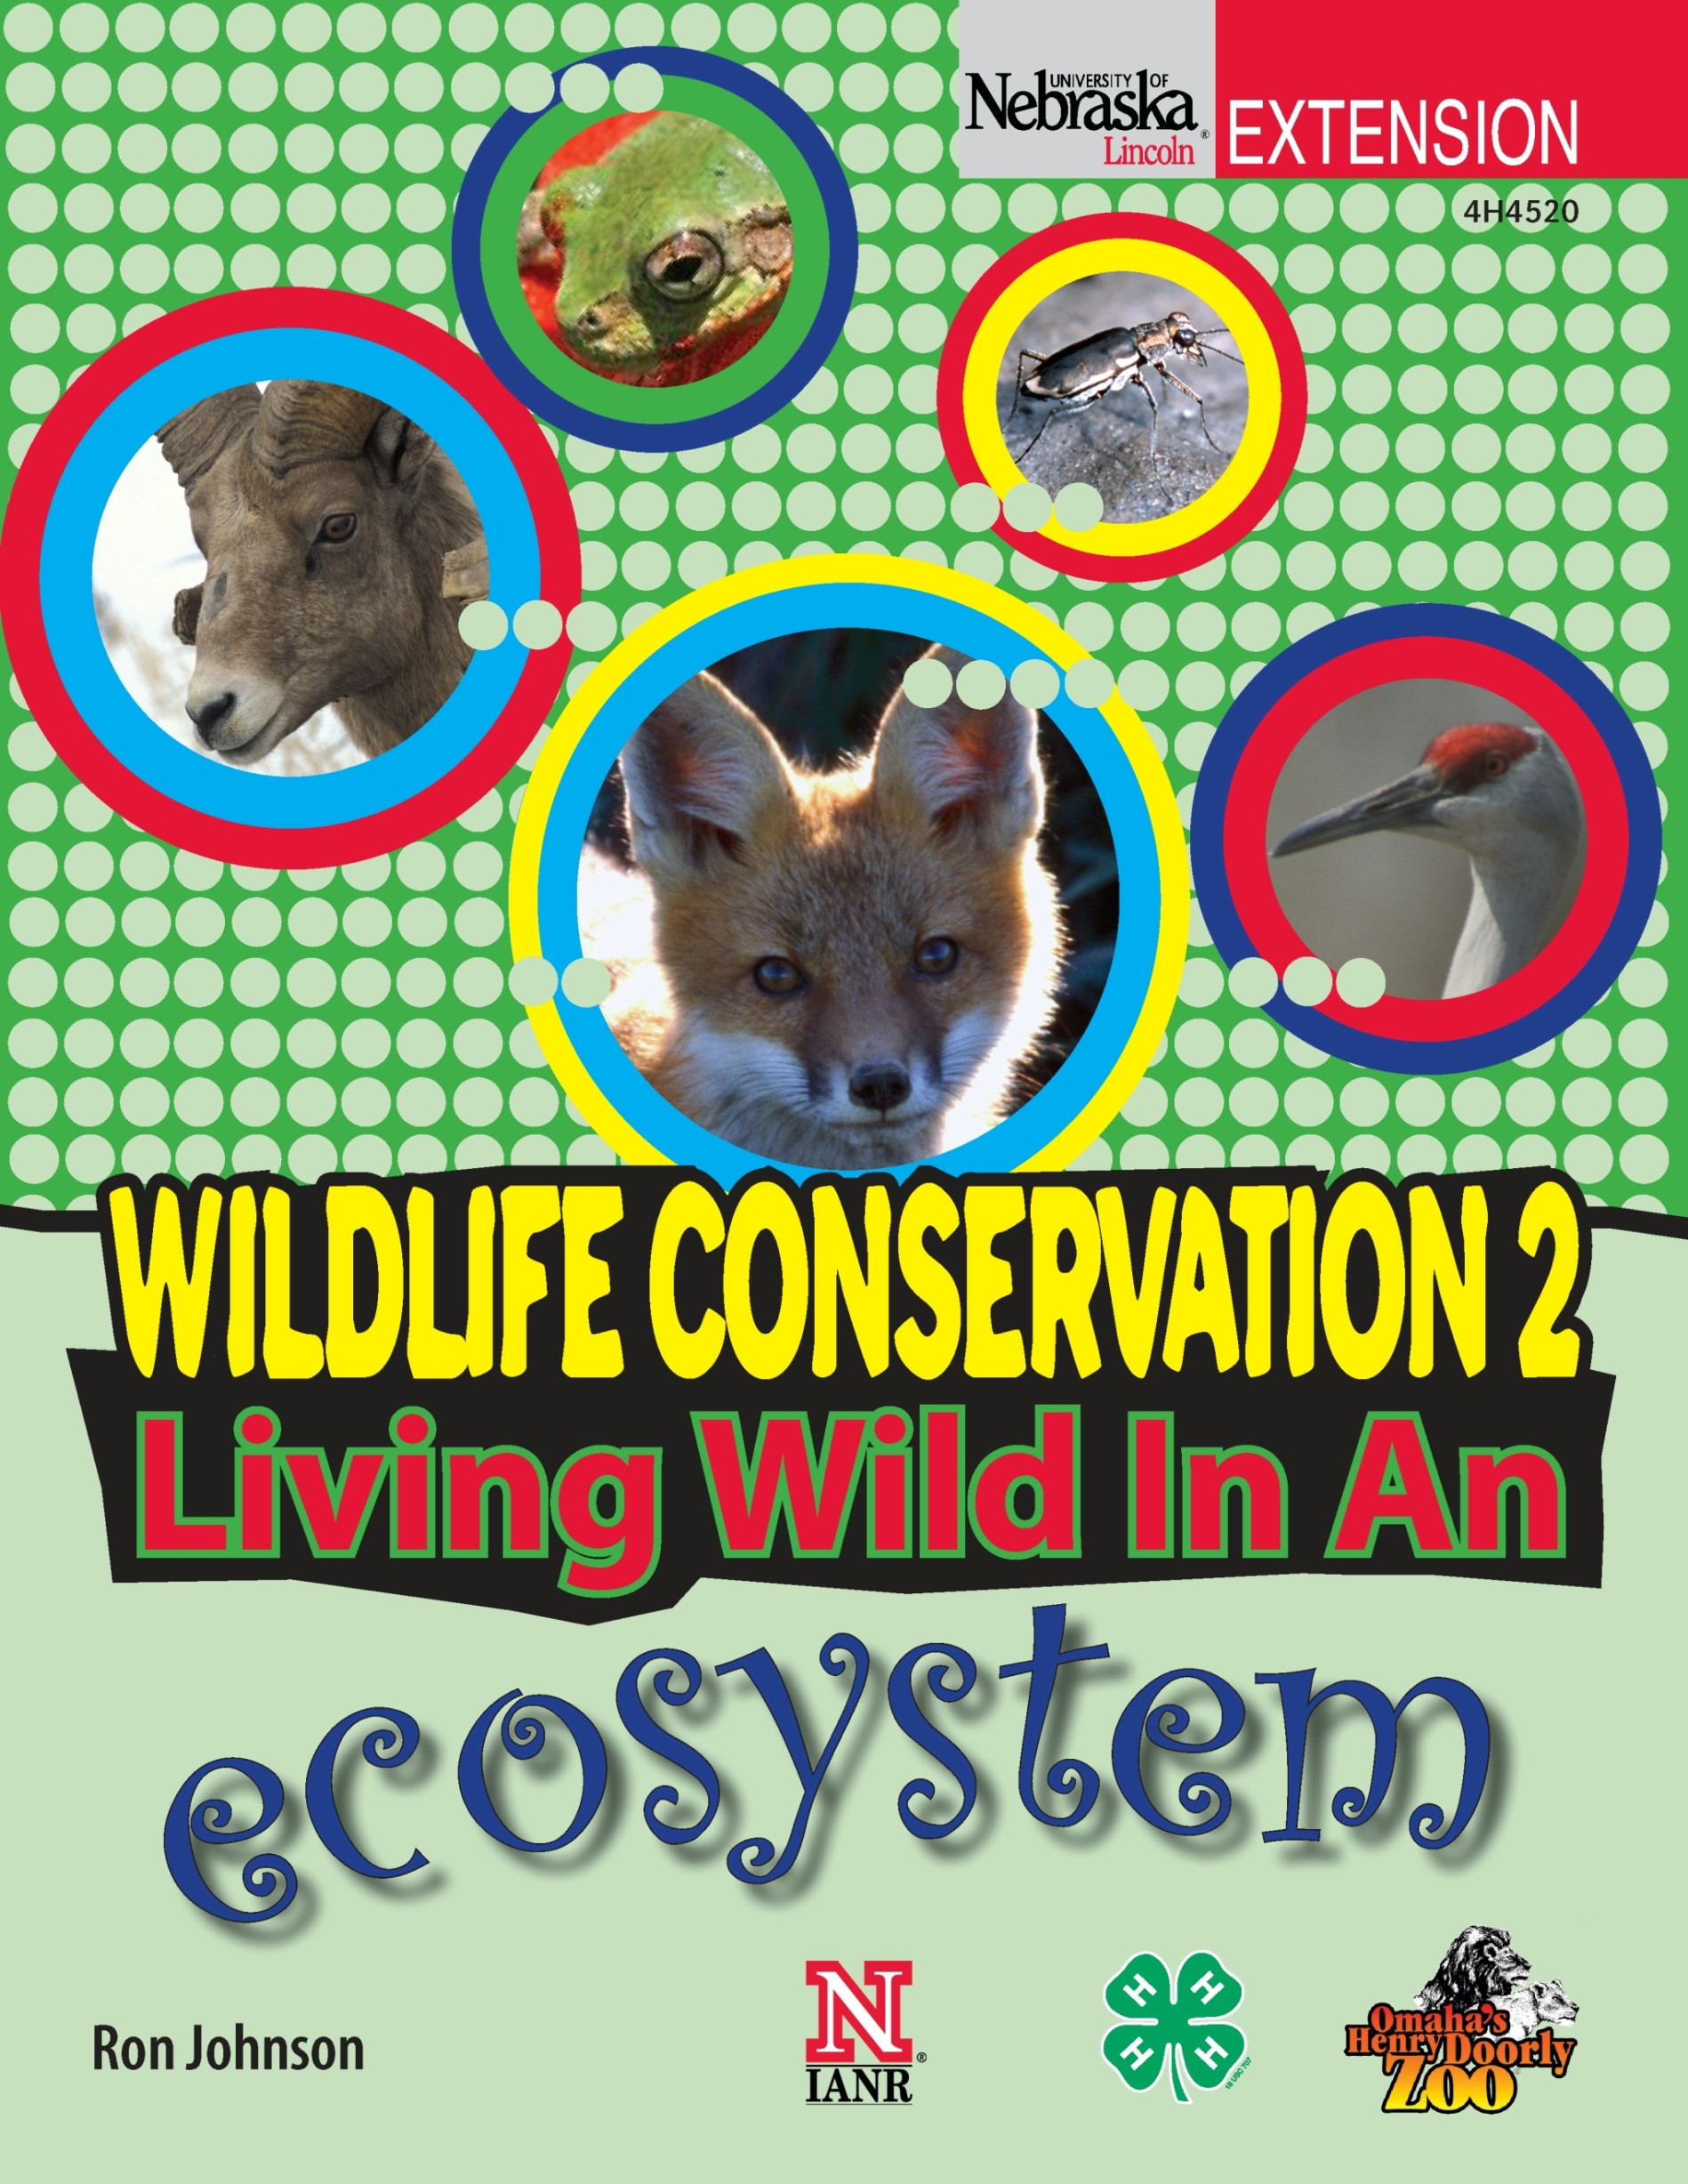 Wildlife Conservation 2: Living Wild in an Ecosystem